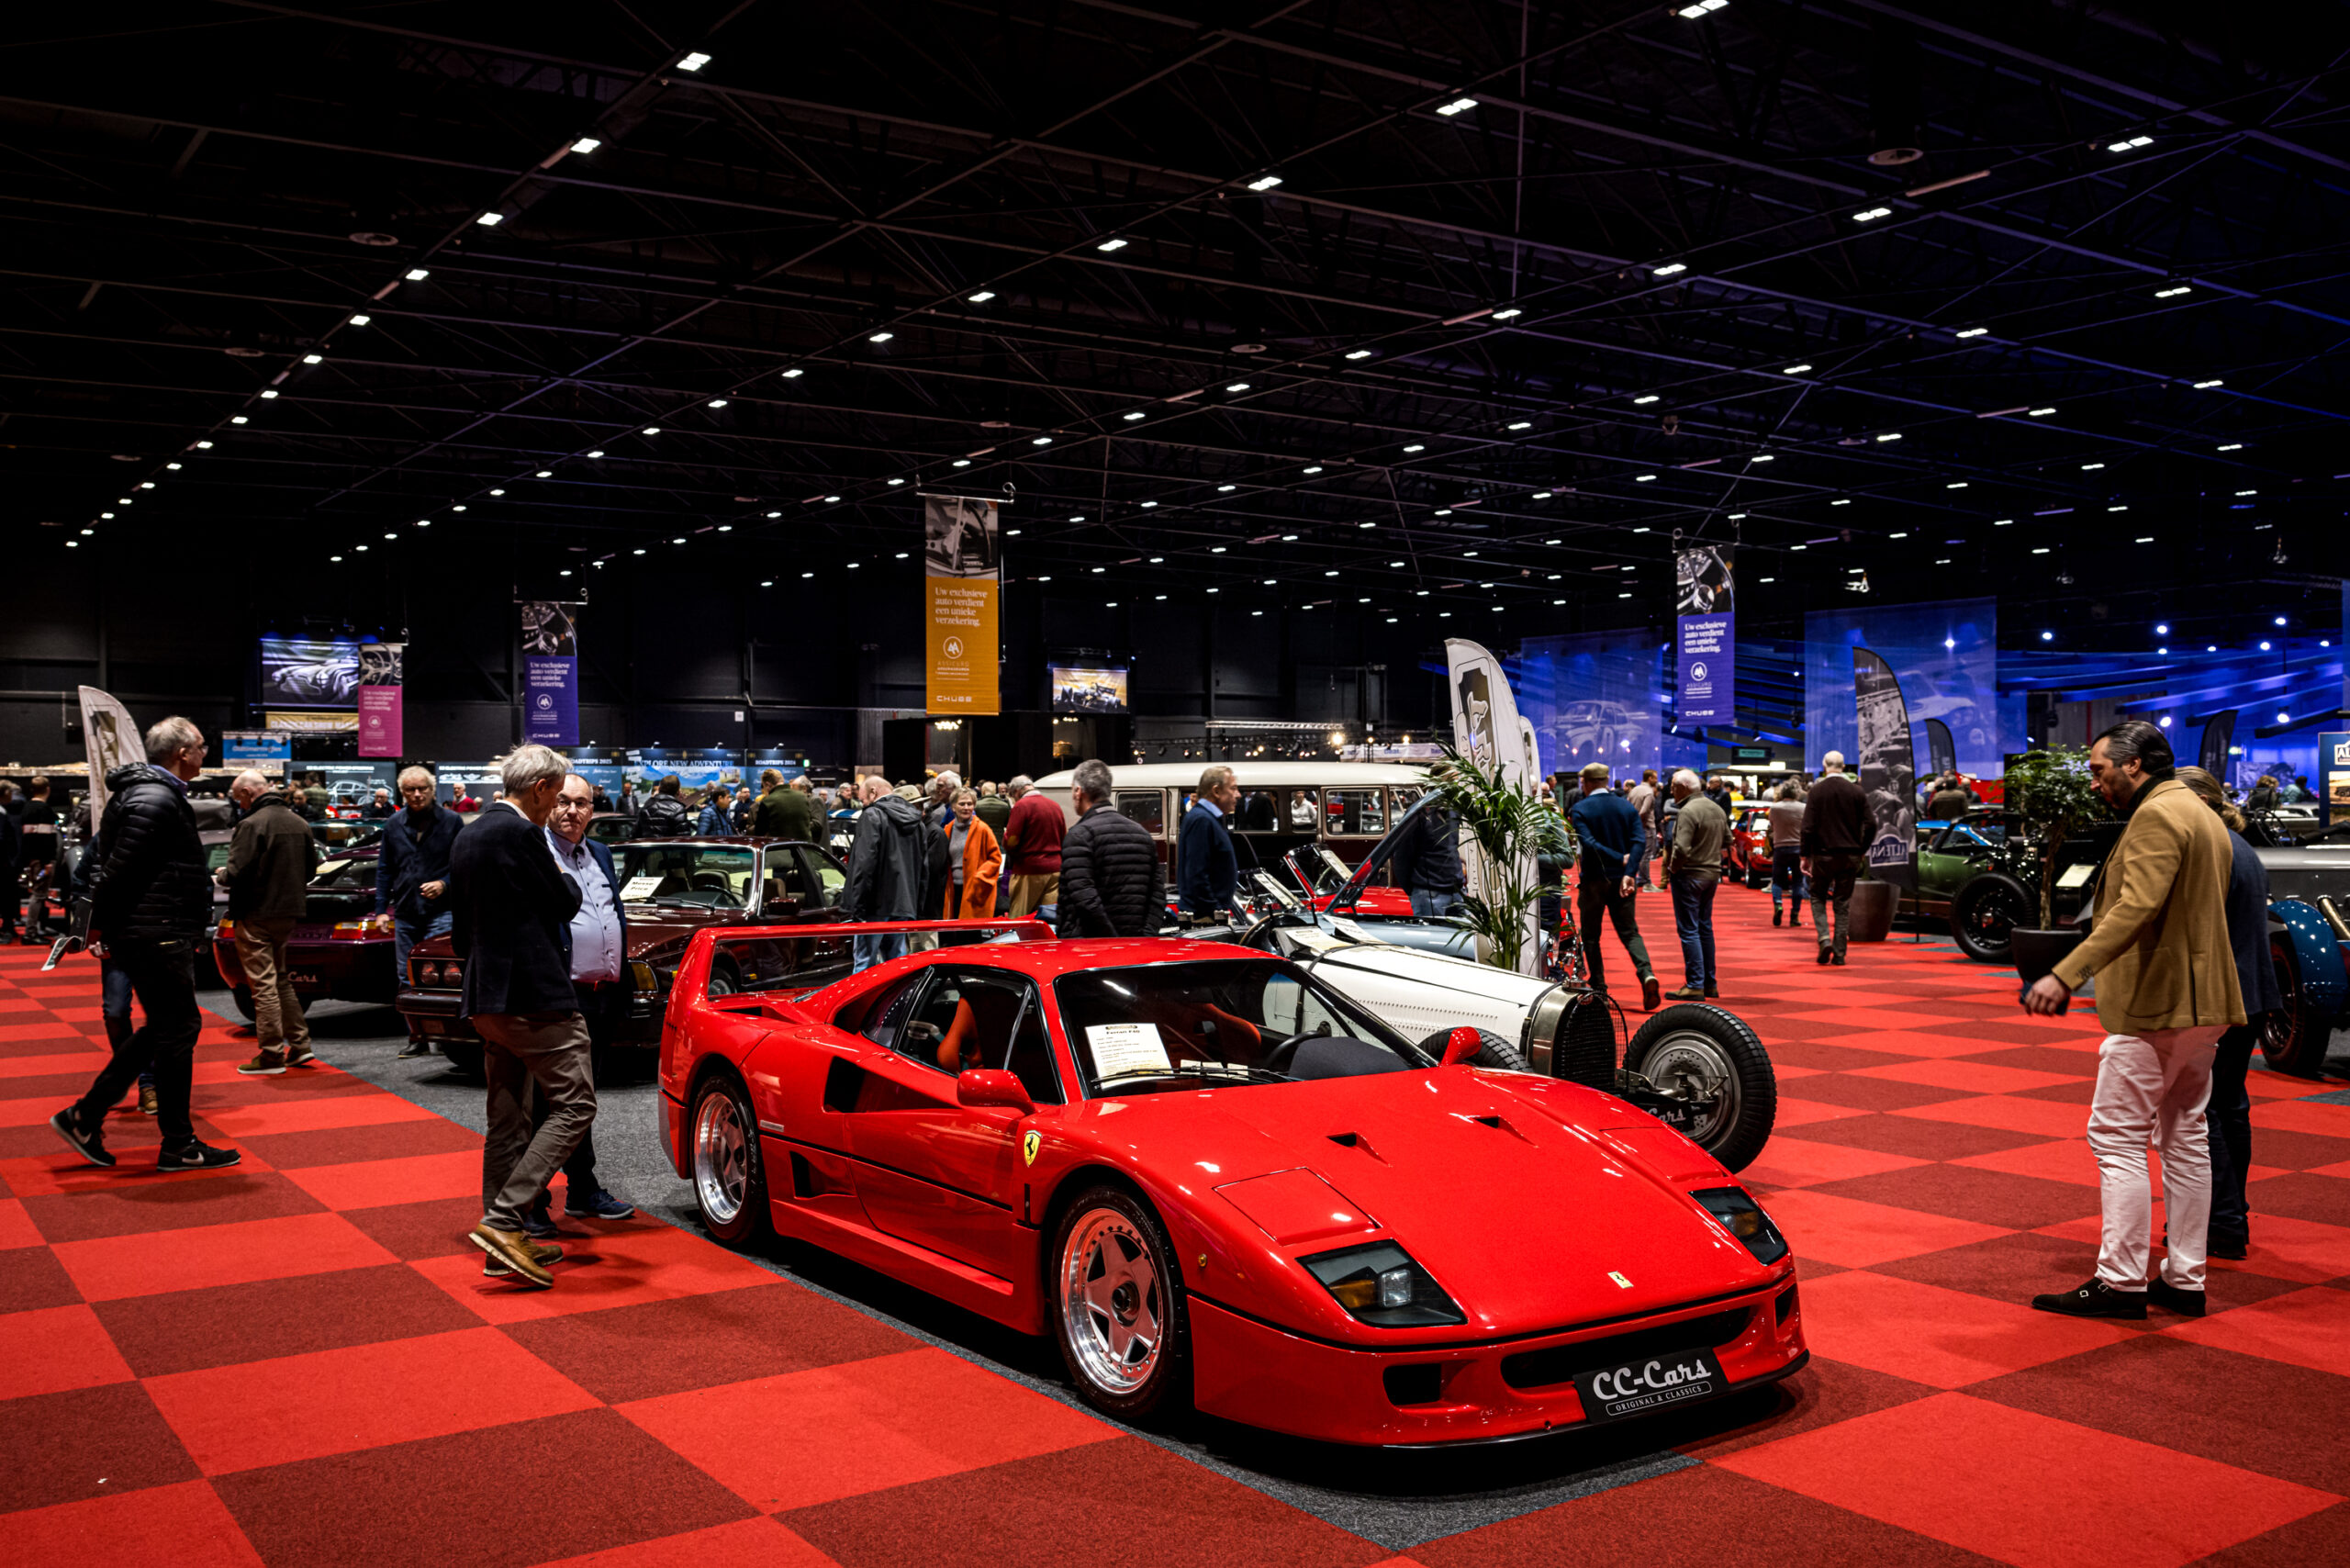 29th edition InterClassics Maastricht breaks new ground in visitor numbers and quality